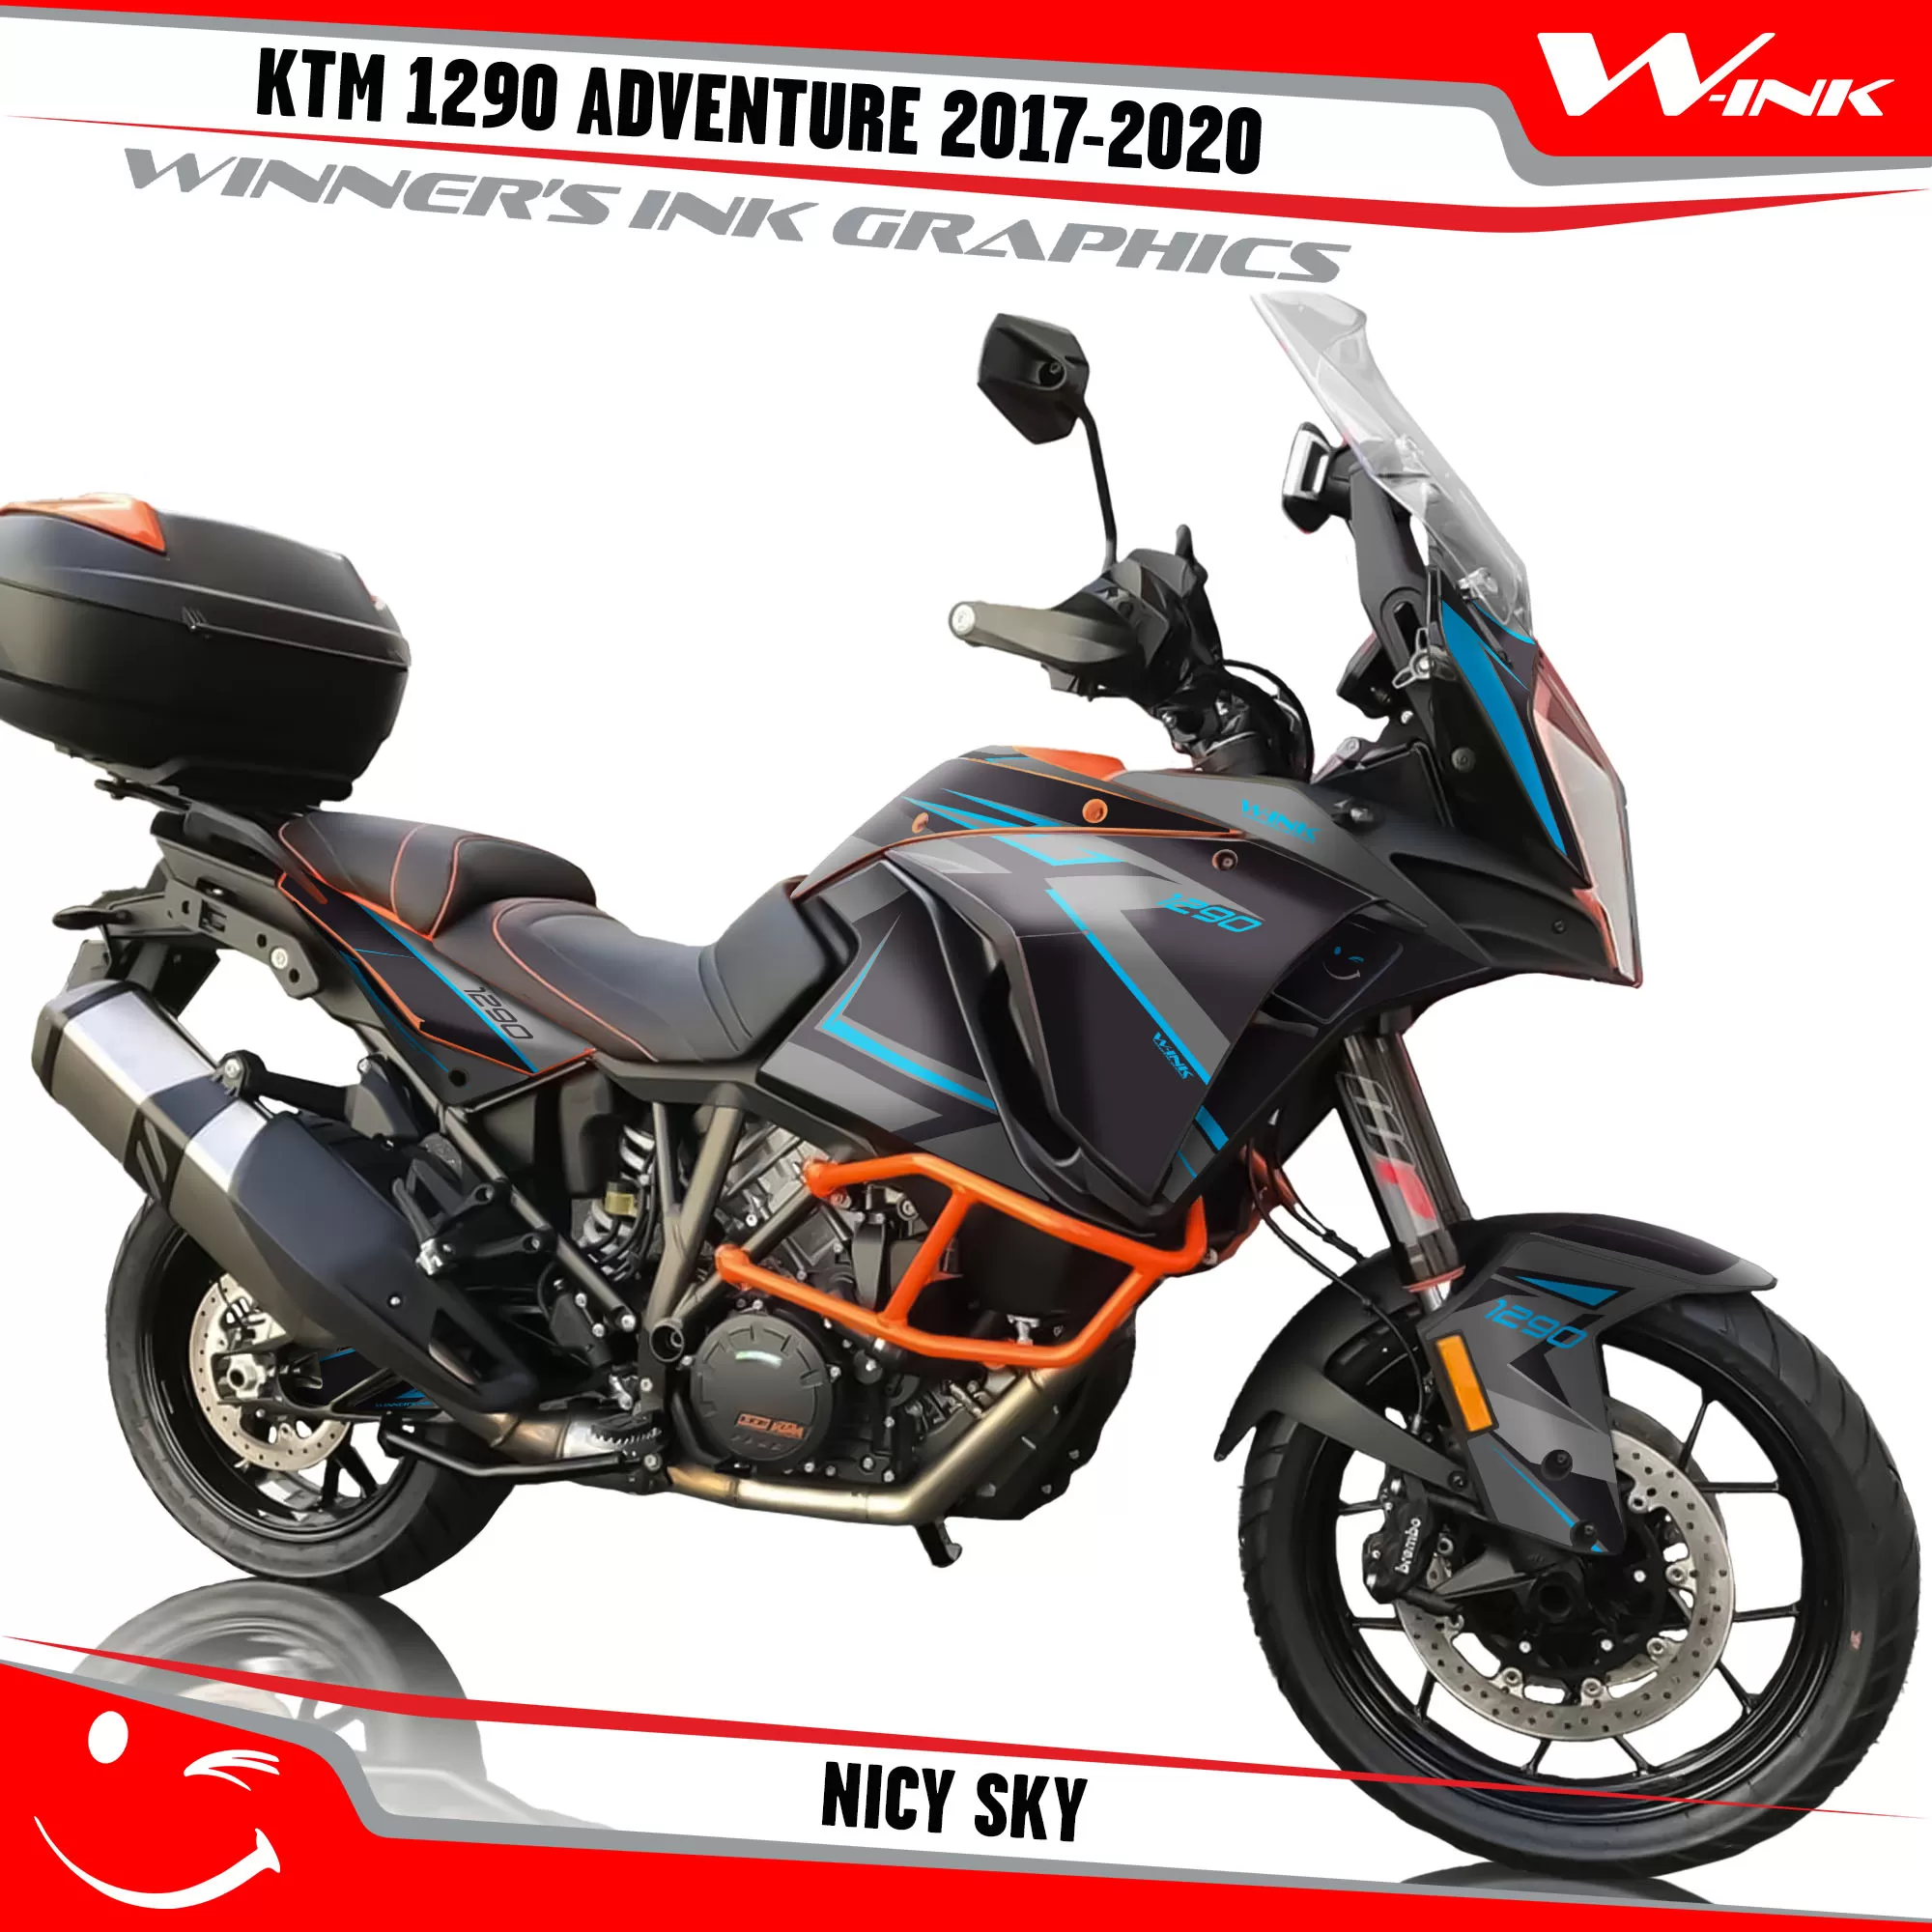 KTM-Adventure-1290-2017-2018-2019-2020-graphics-kit-and-decals-Nicy-Sky